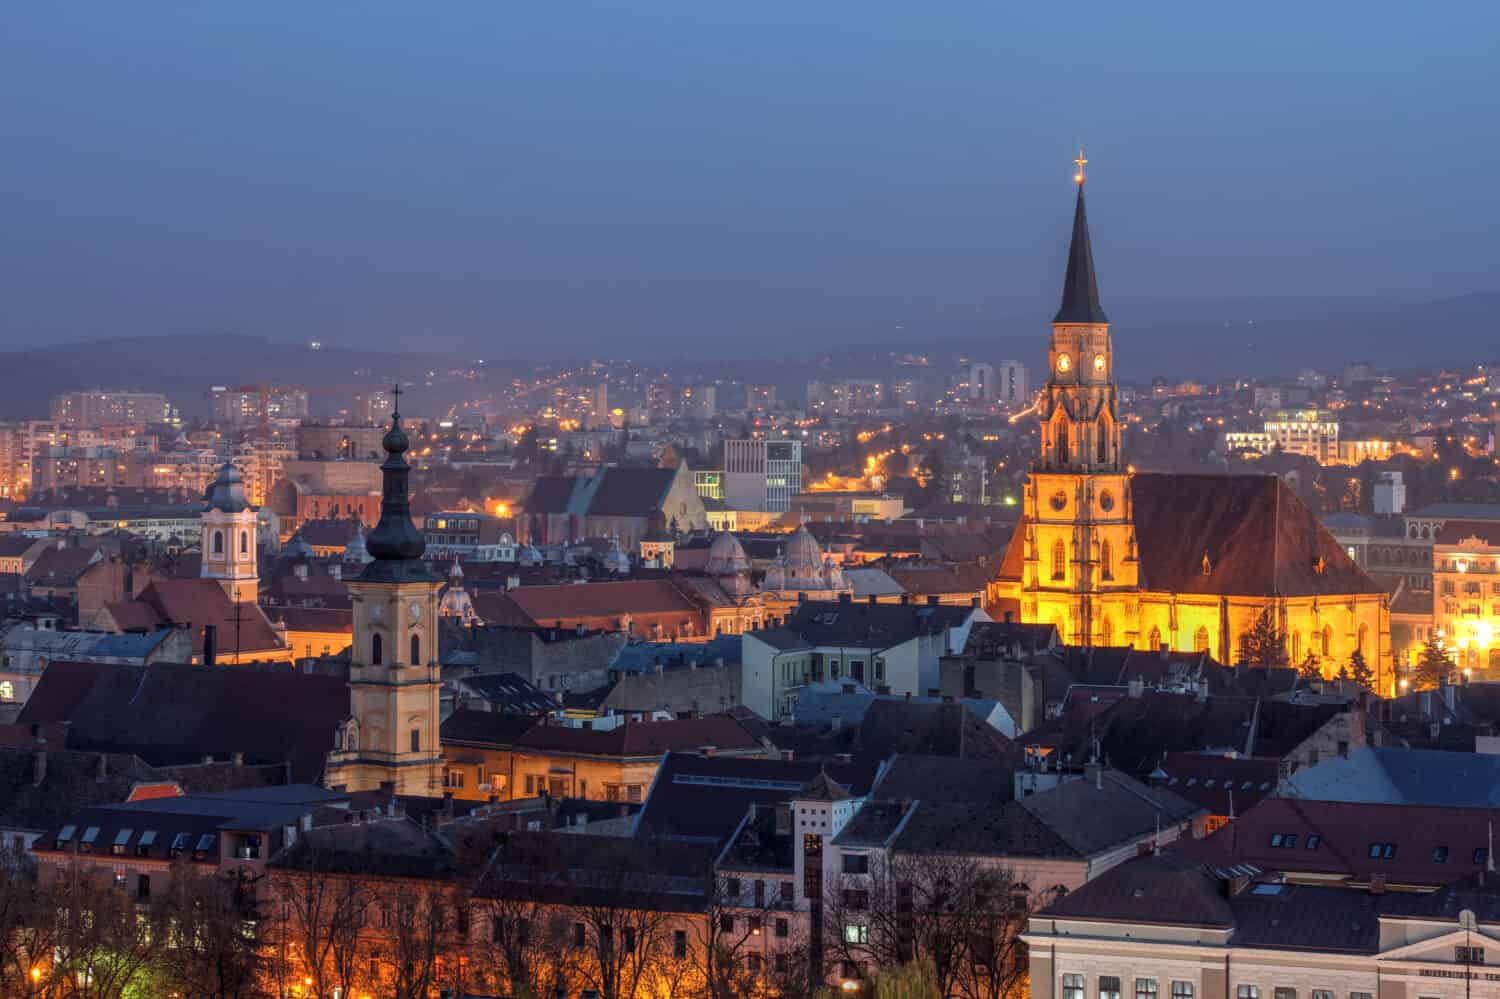 <p>Romania is spectacular. People may disregard the country because of its history or preconceptions, however, Romania is just beautiful. It has stunning mountains and medieval towns steeped in rich history, and, of course, <a href="https://time.com/5411826/bram-stoker-dracula-history/">Dracula is from</a> the Transylvania region of the country. You can find hotels for $30-$40 per night and meals can be up to $15 per day.</p>